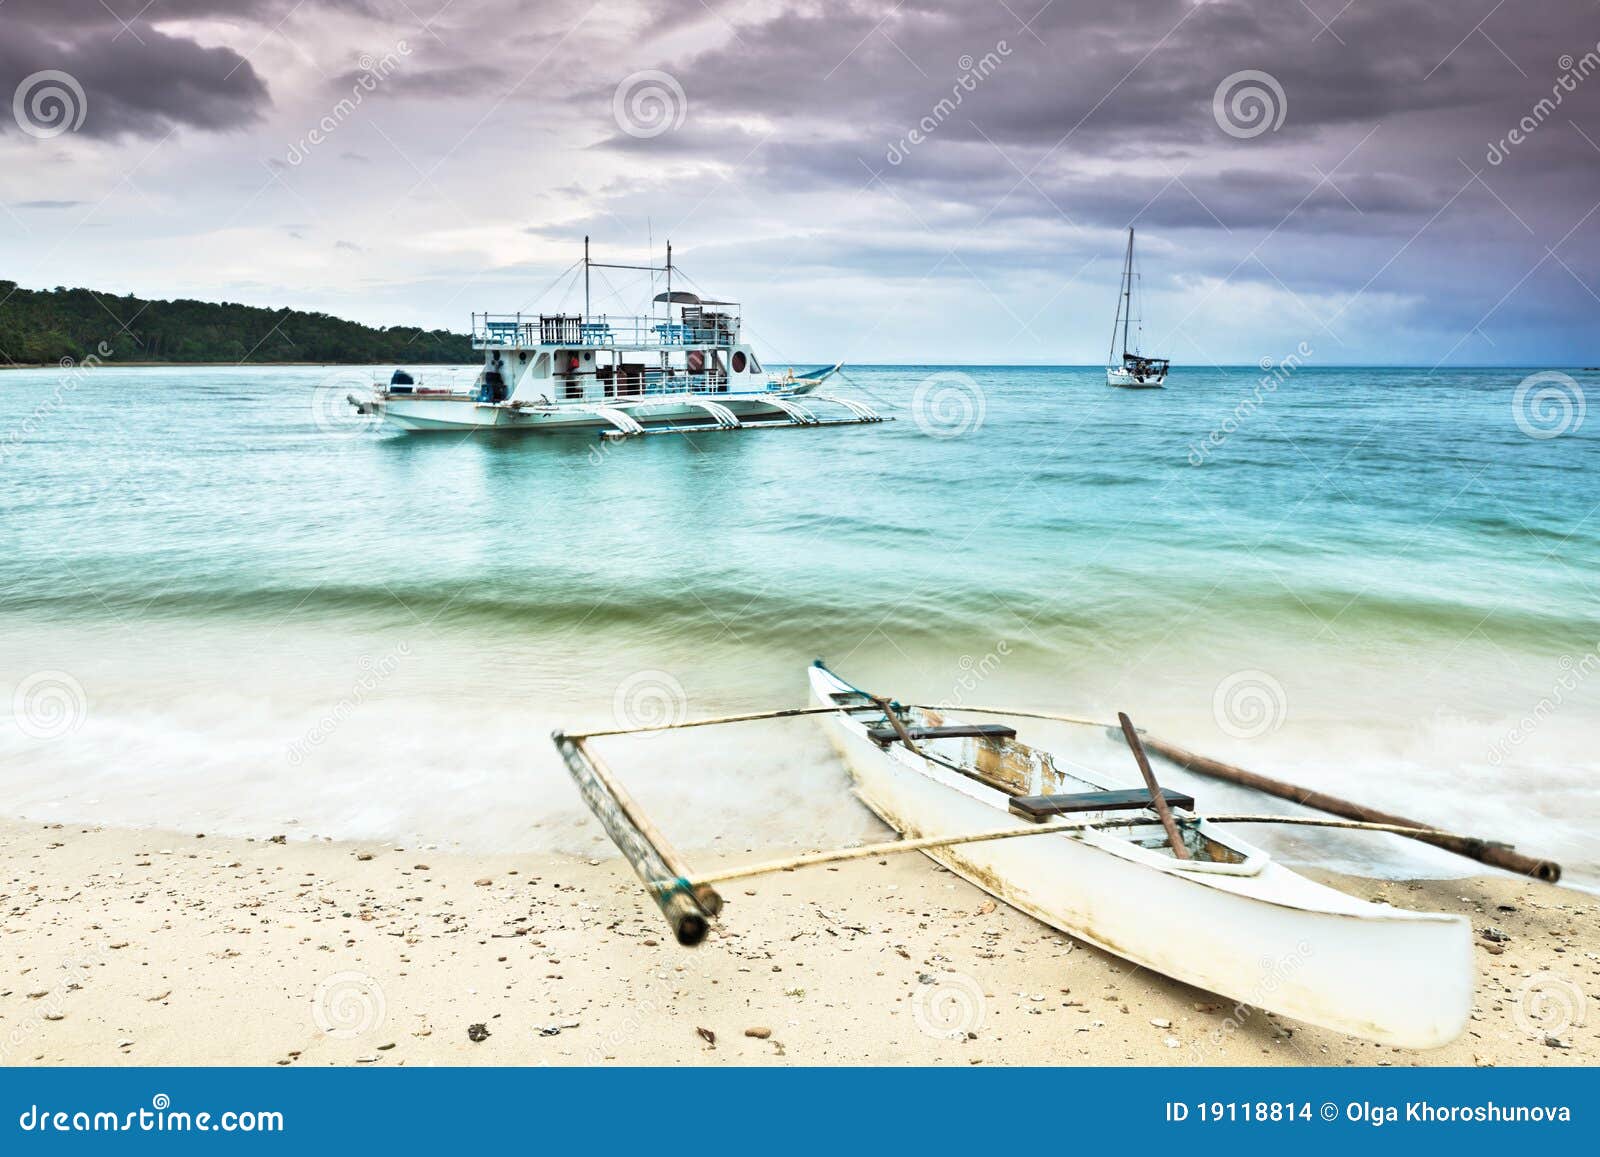 Traditional Philippine boat in the tropical lagoon.